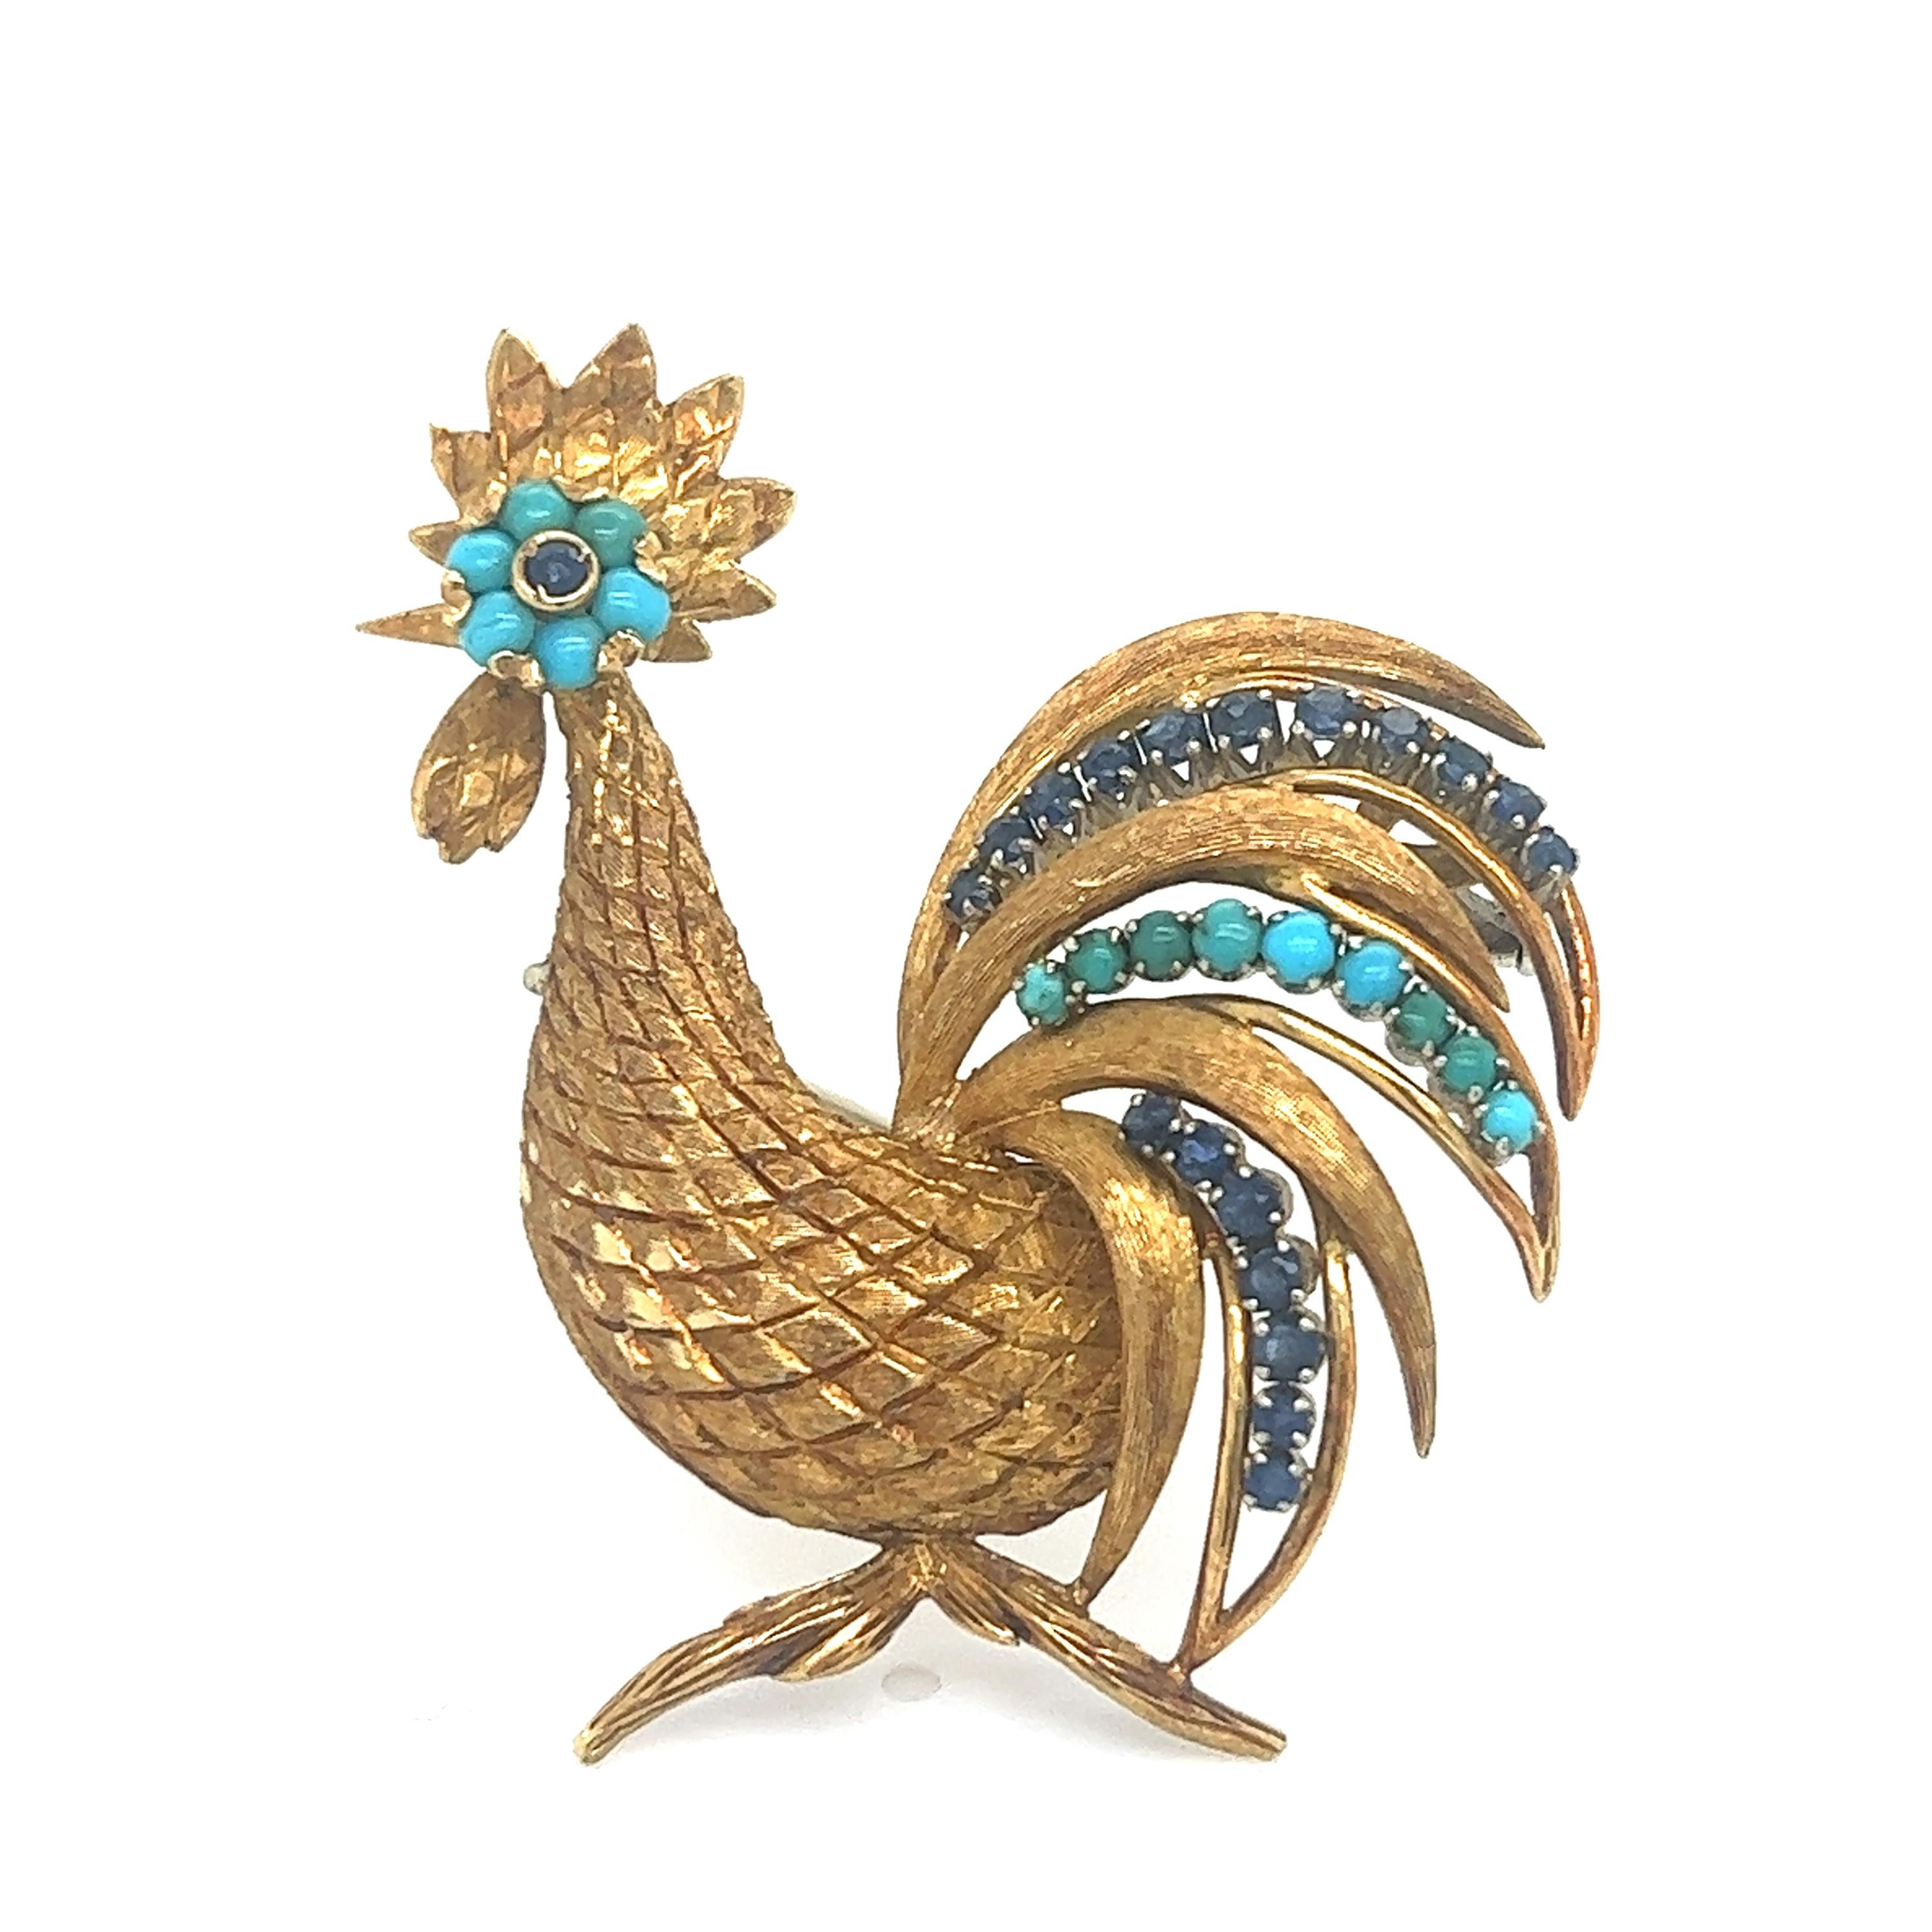 Beautiful brooch crafted in 18k yellow gold. The brooch depicts a rooster with fine details seen throughout. Multiple polish textures makes this item feel almost lifelike.
The brooch is highlighted with earth mined natural turquoise and blue